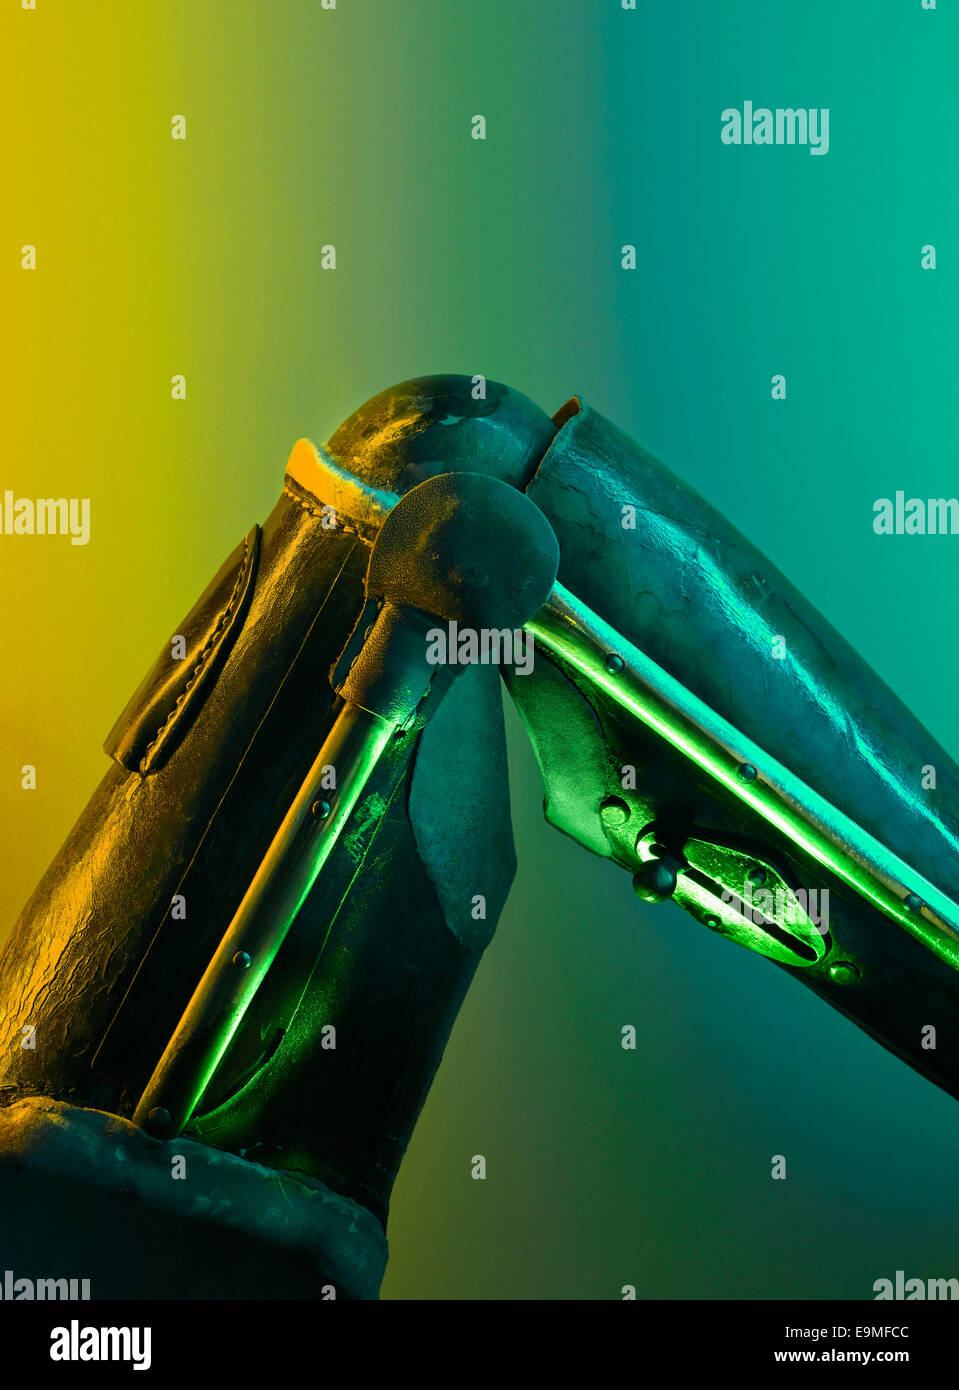 Cropped image of robotic limb against colored background Stock Photo